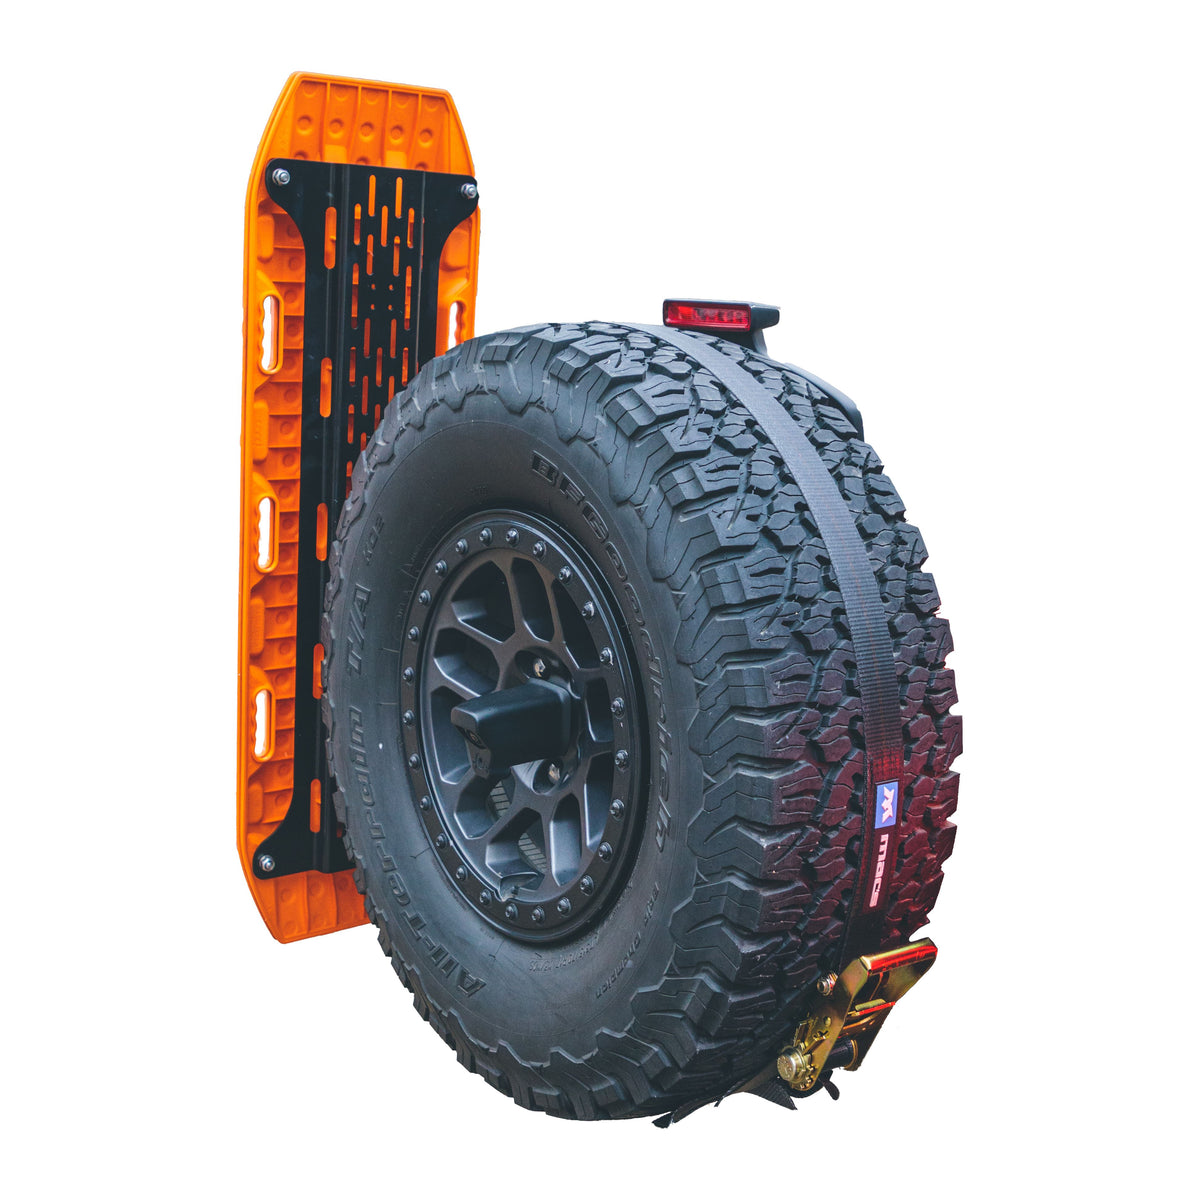 Overland Kitted Spare Tire MAXTRAX Mounting System  Mounting Gear Overland Kitted- Overland Kitted